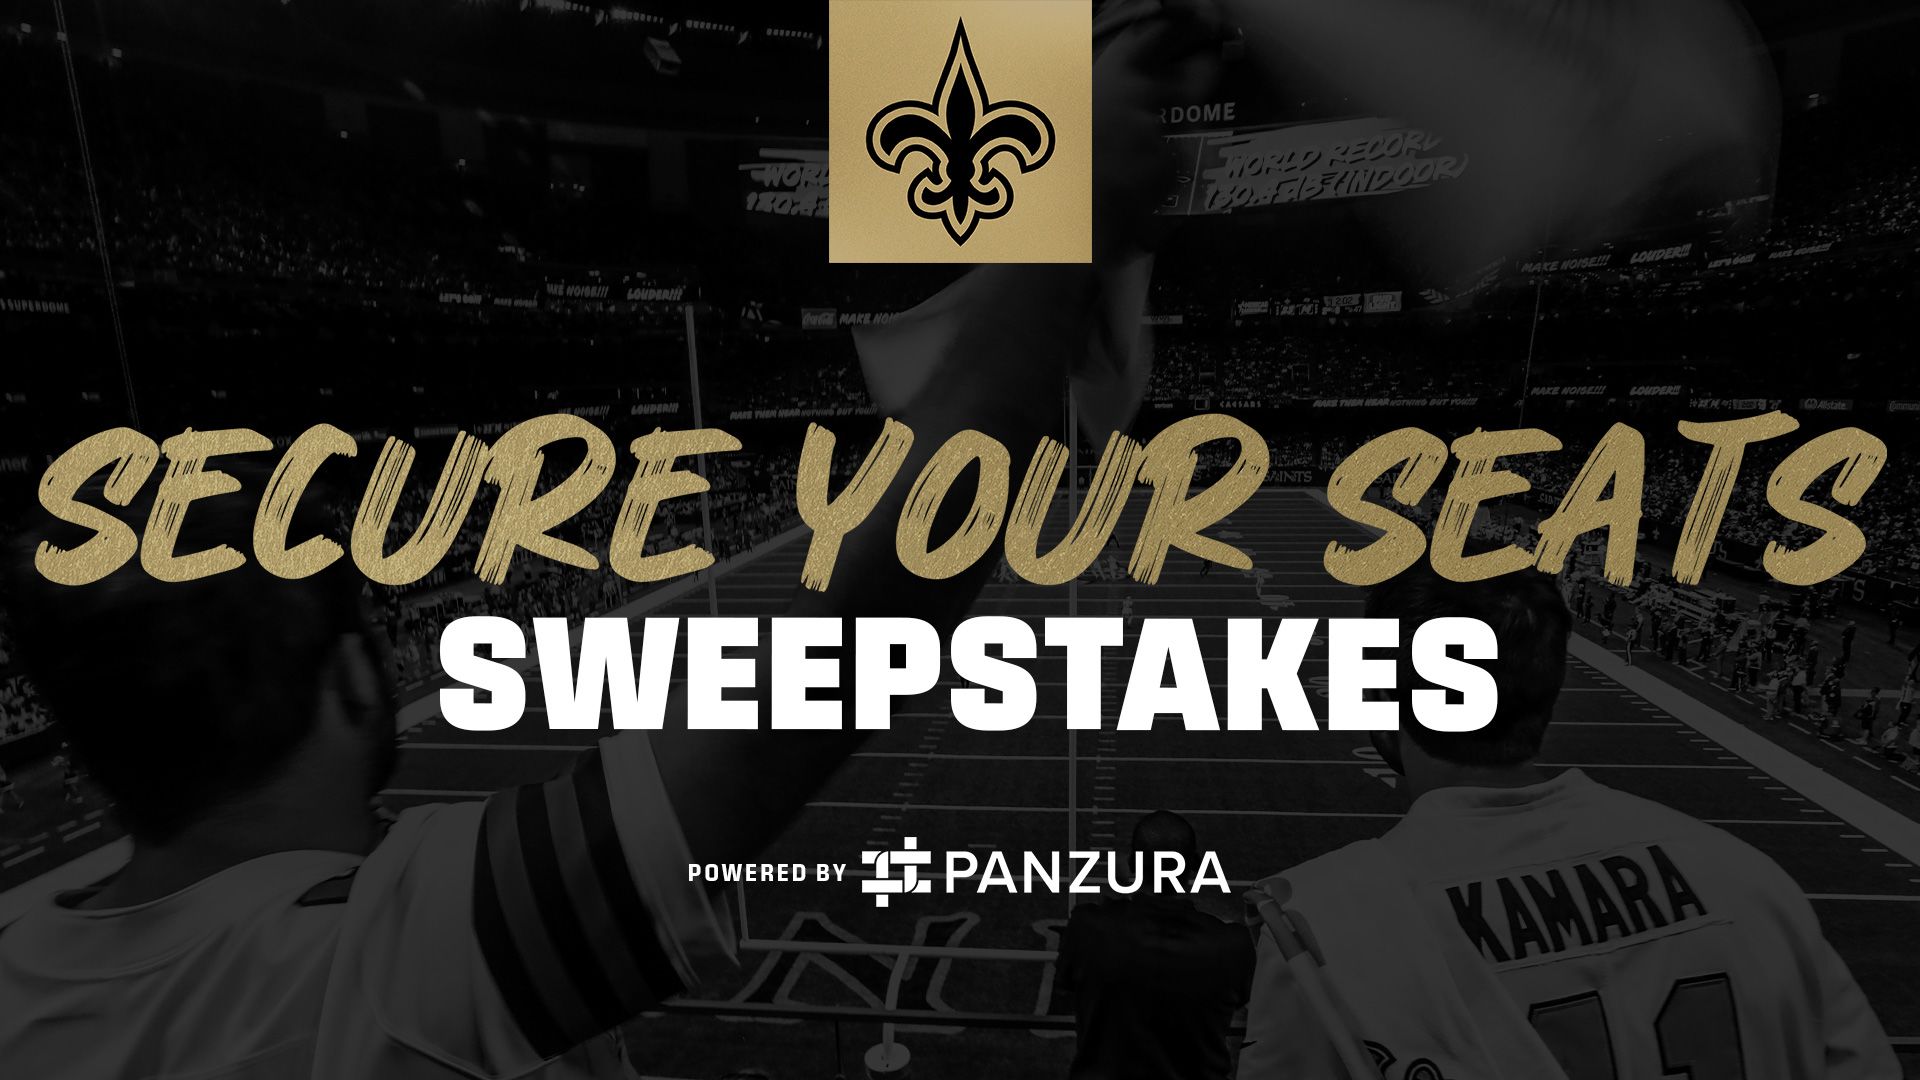 Saints 2022 Secure Your Seats Sweepstakes presented by Panzura